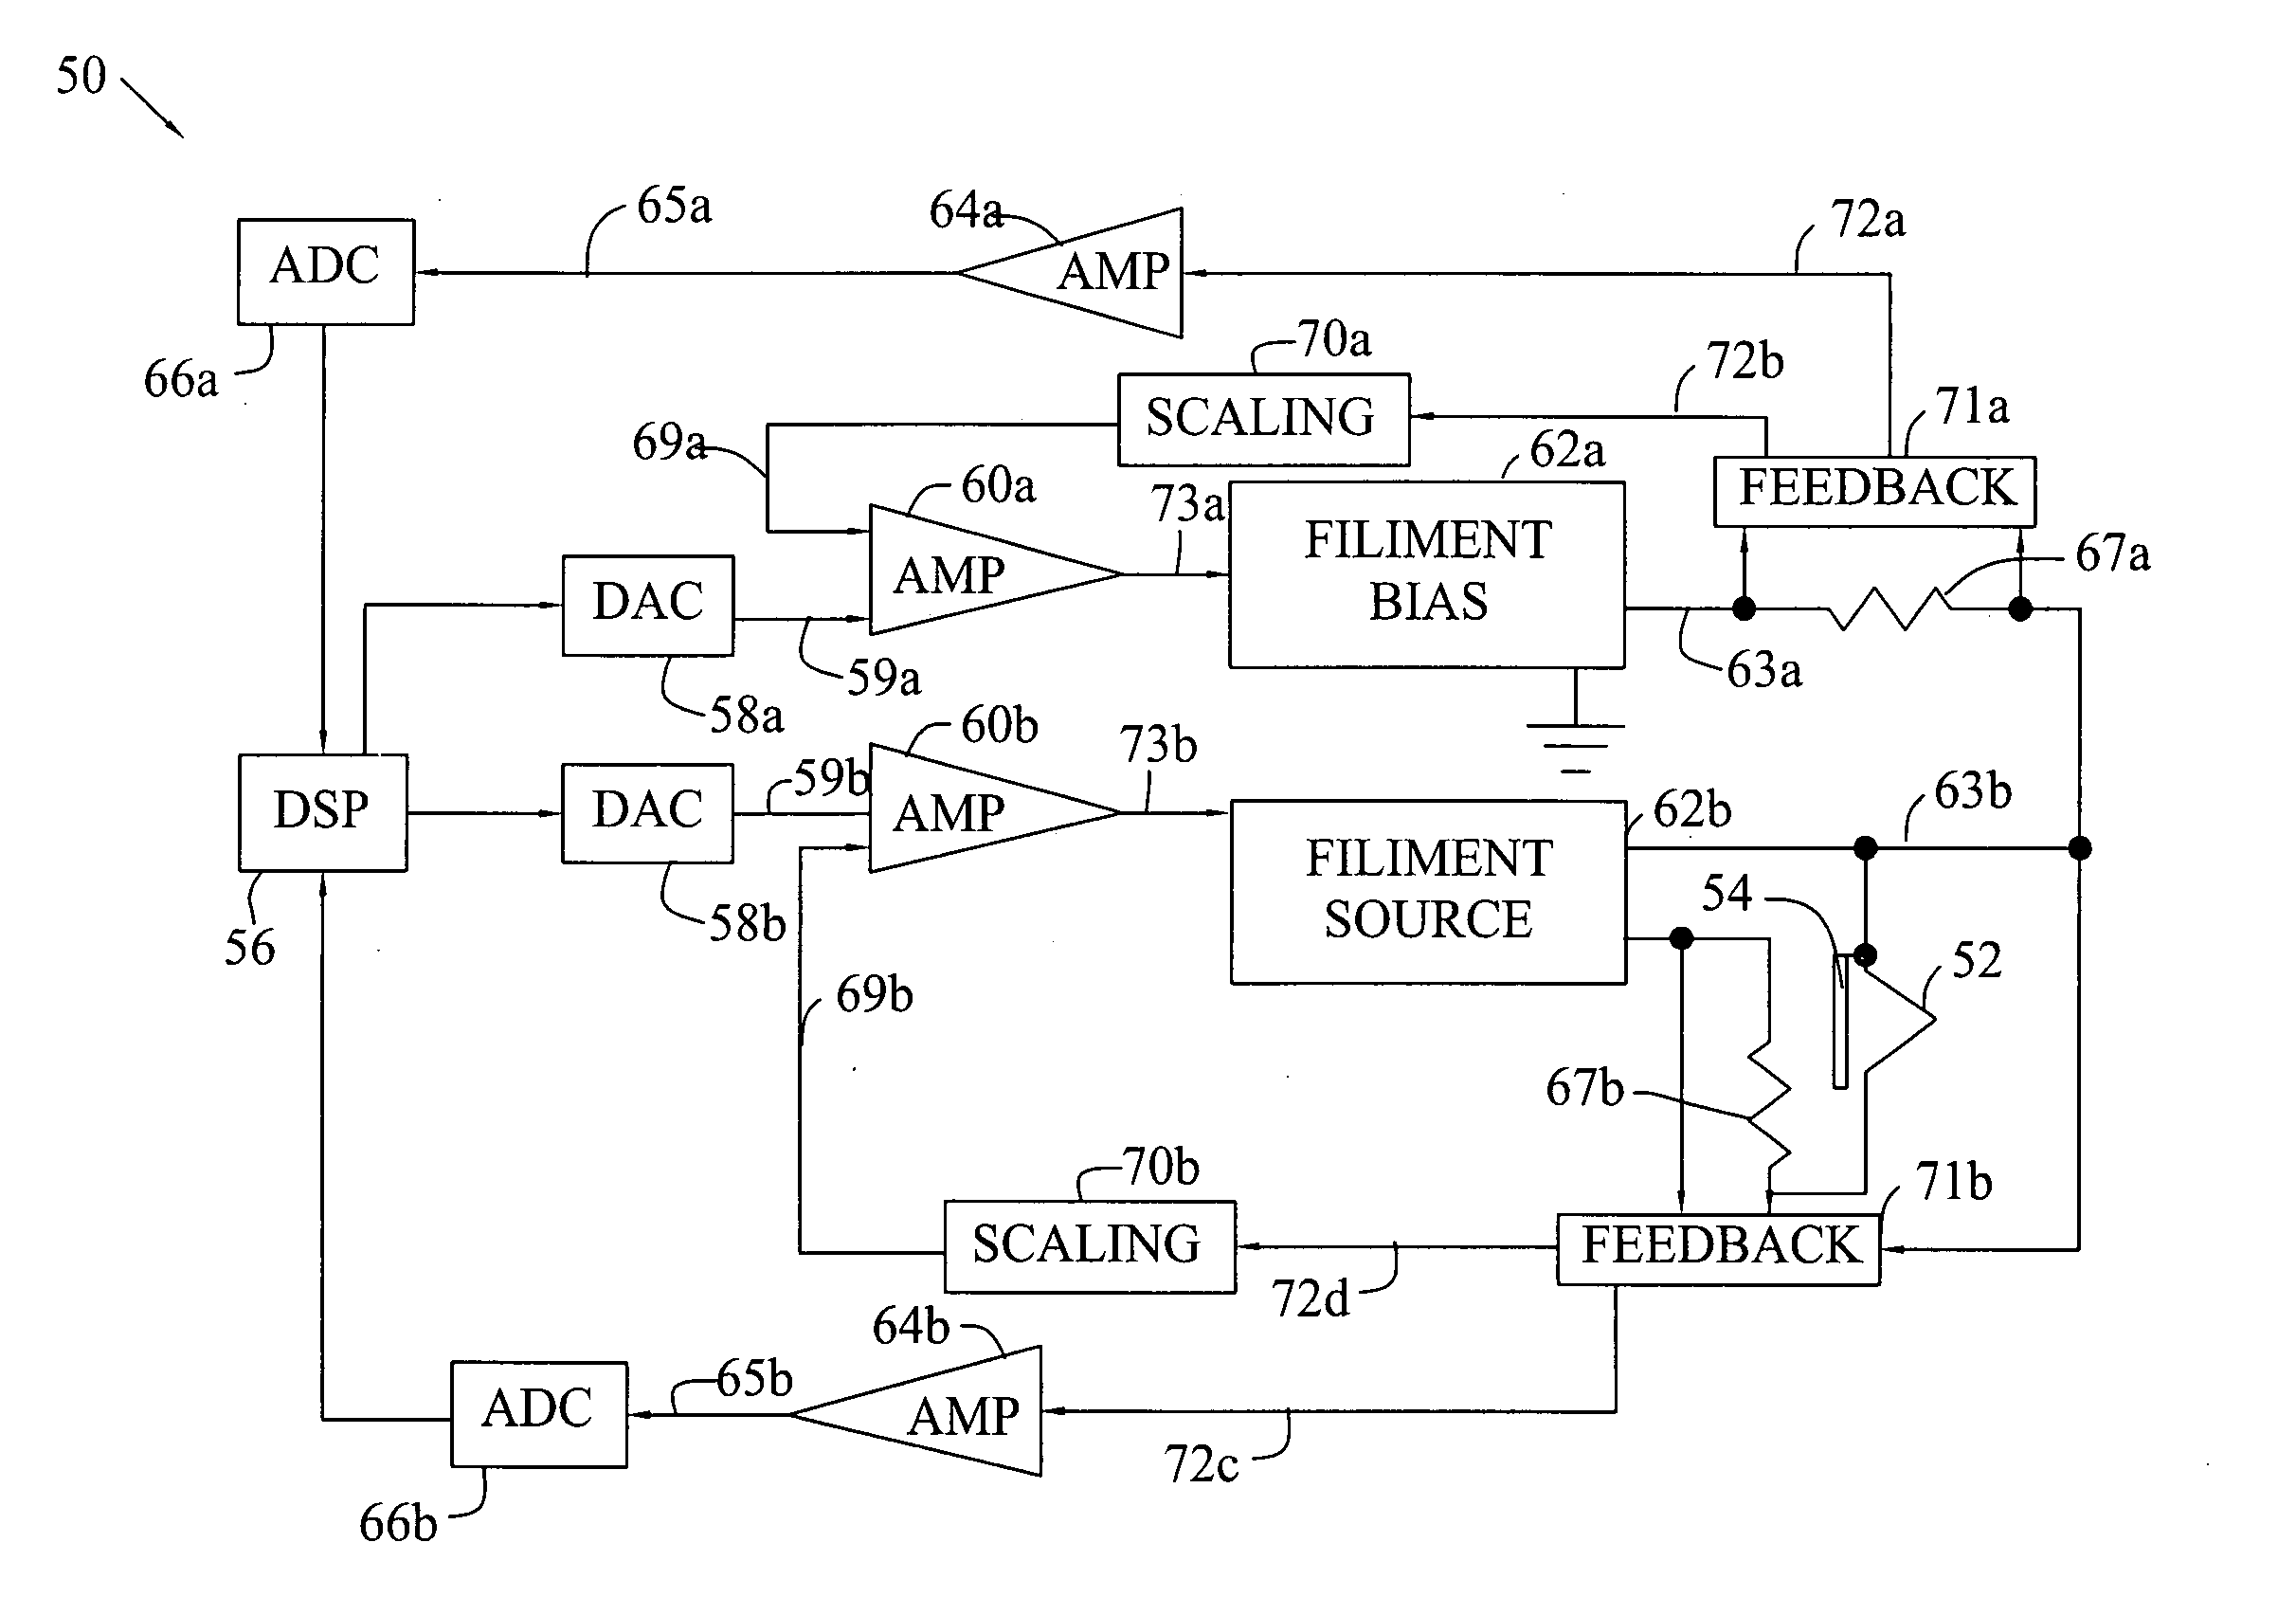 Method of automatically calibrating electronic controls in a mass spectrometer